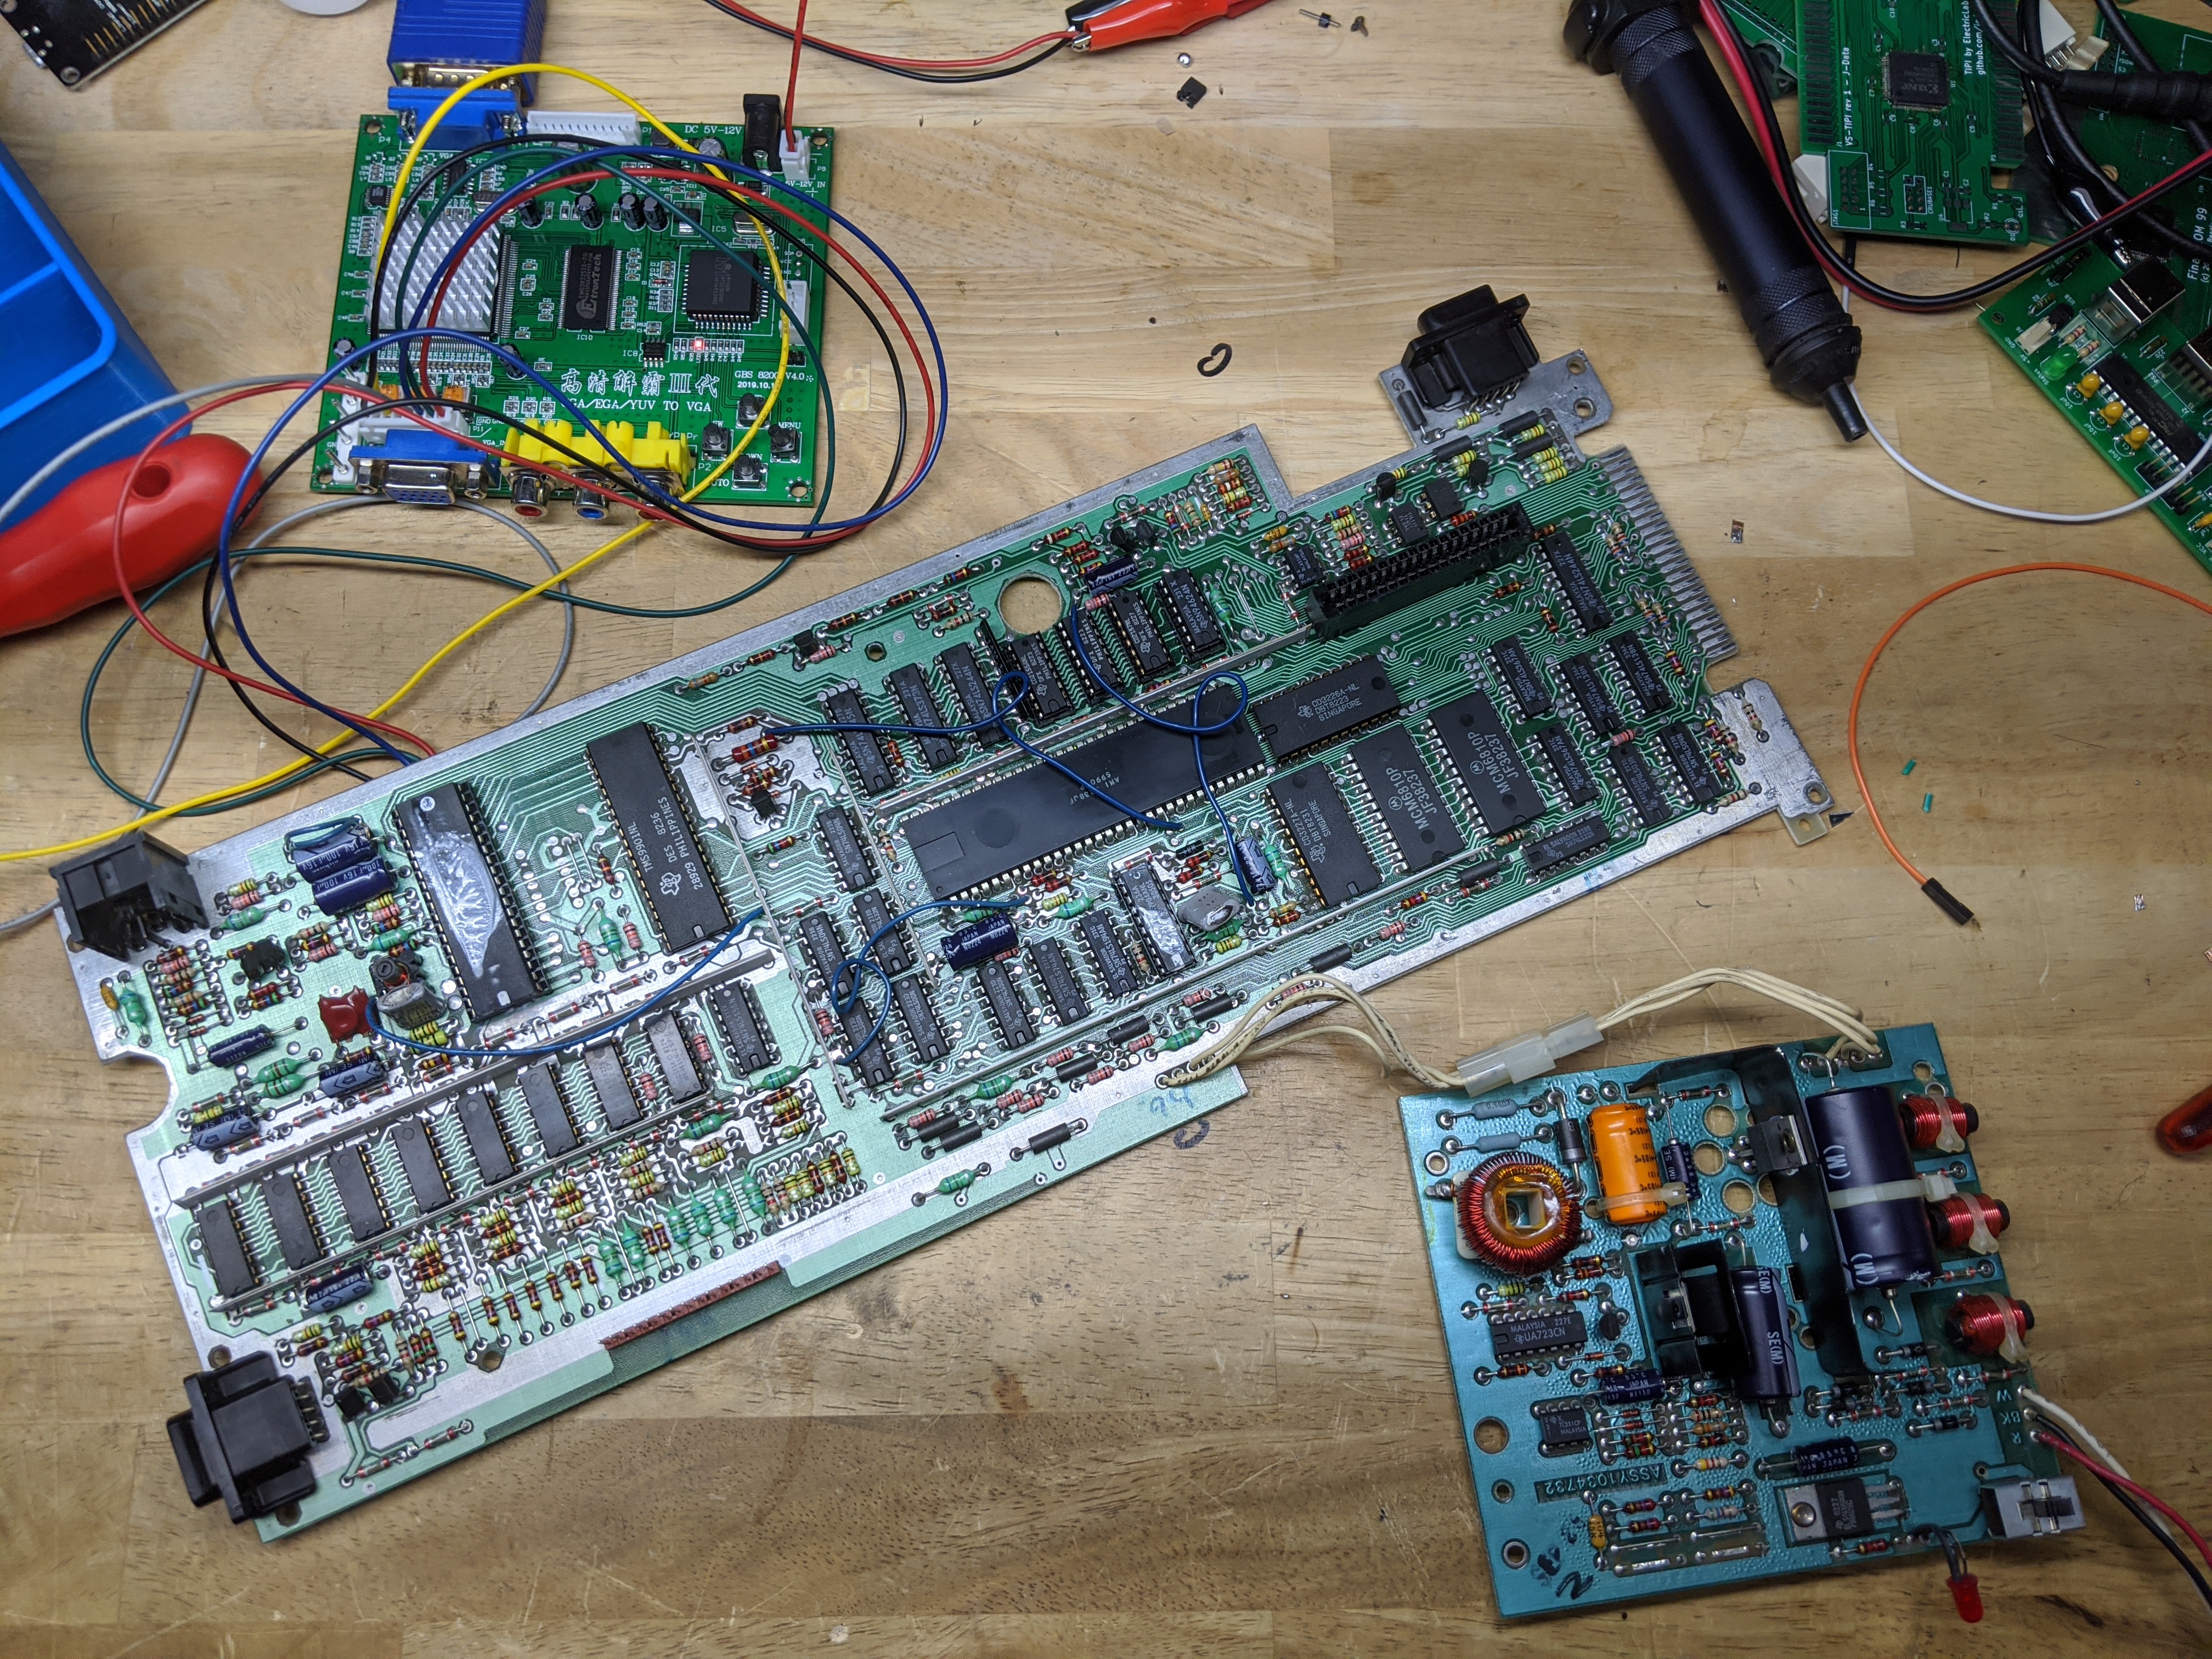 TI-99/4A board and GNS-8200 upscaler